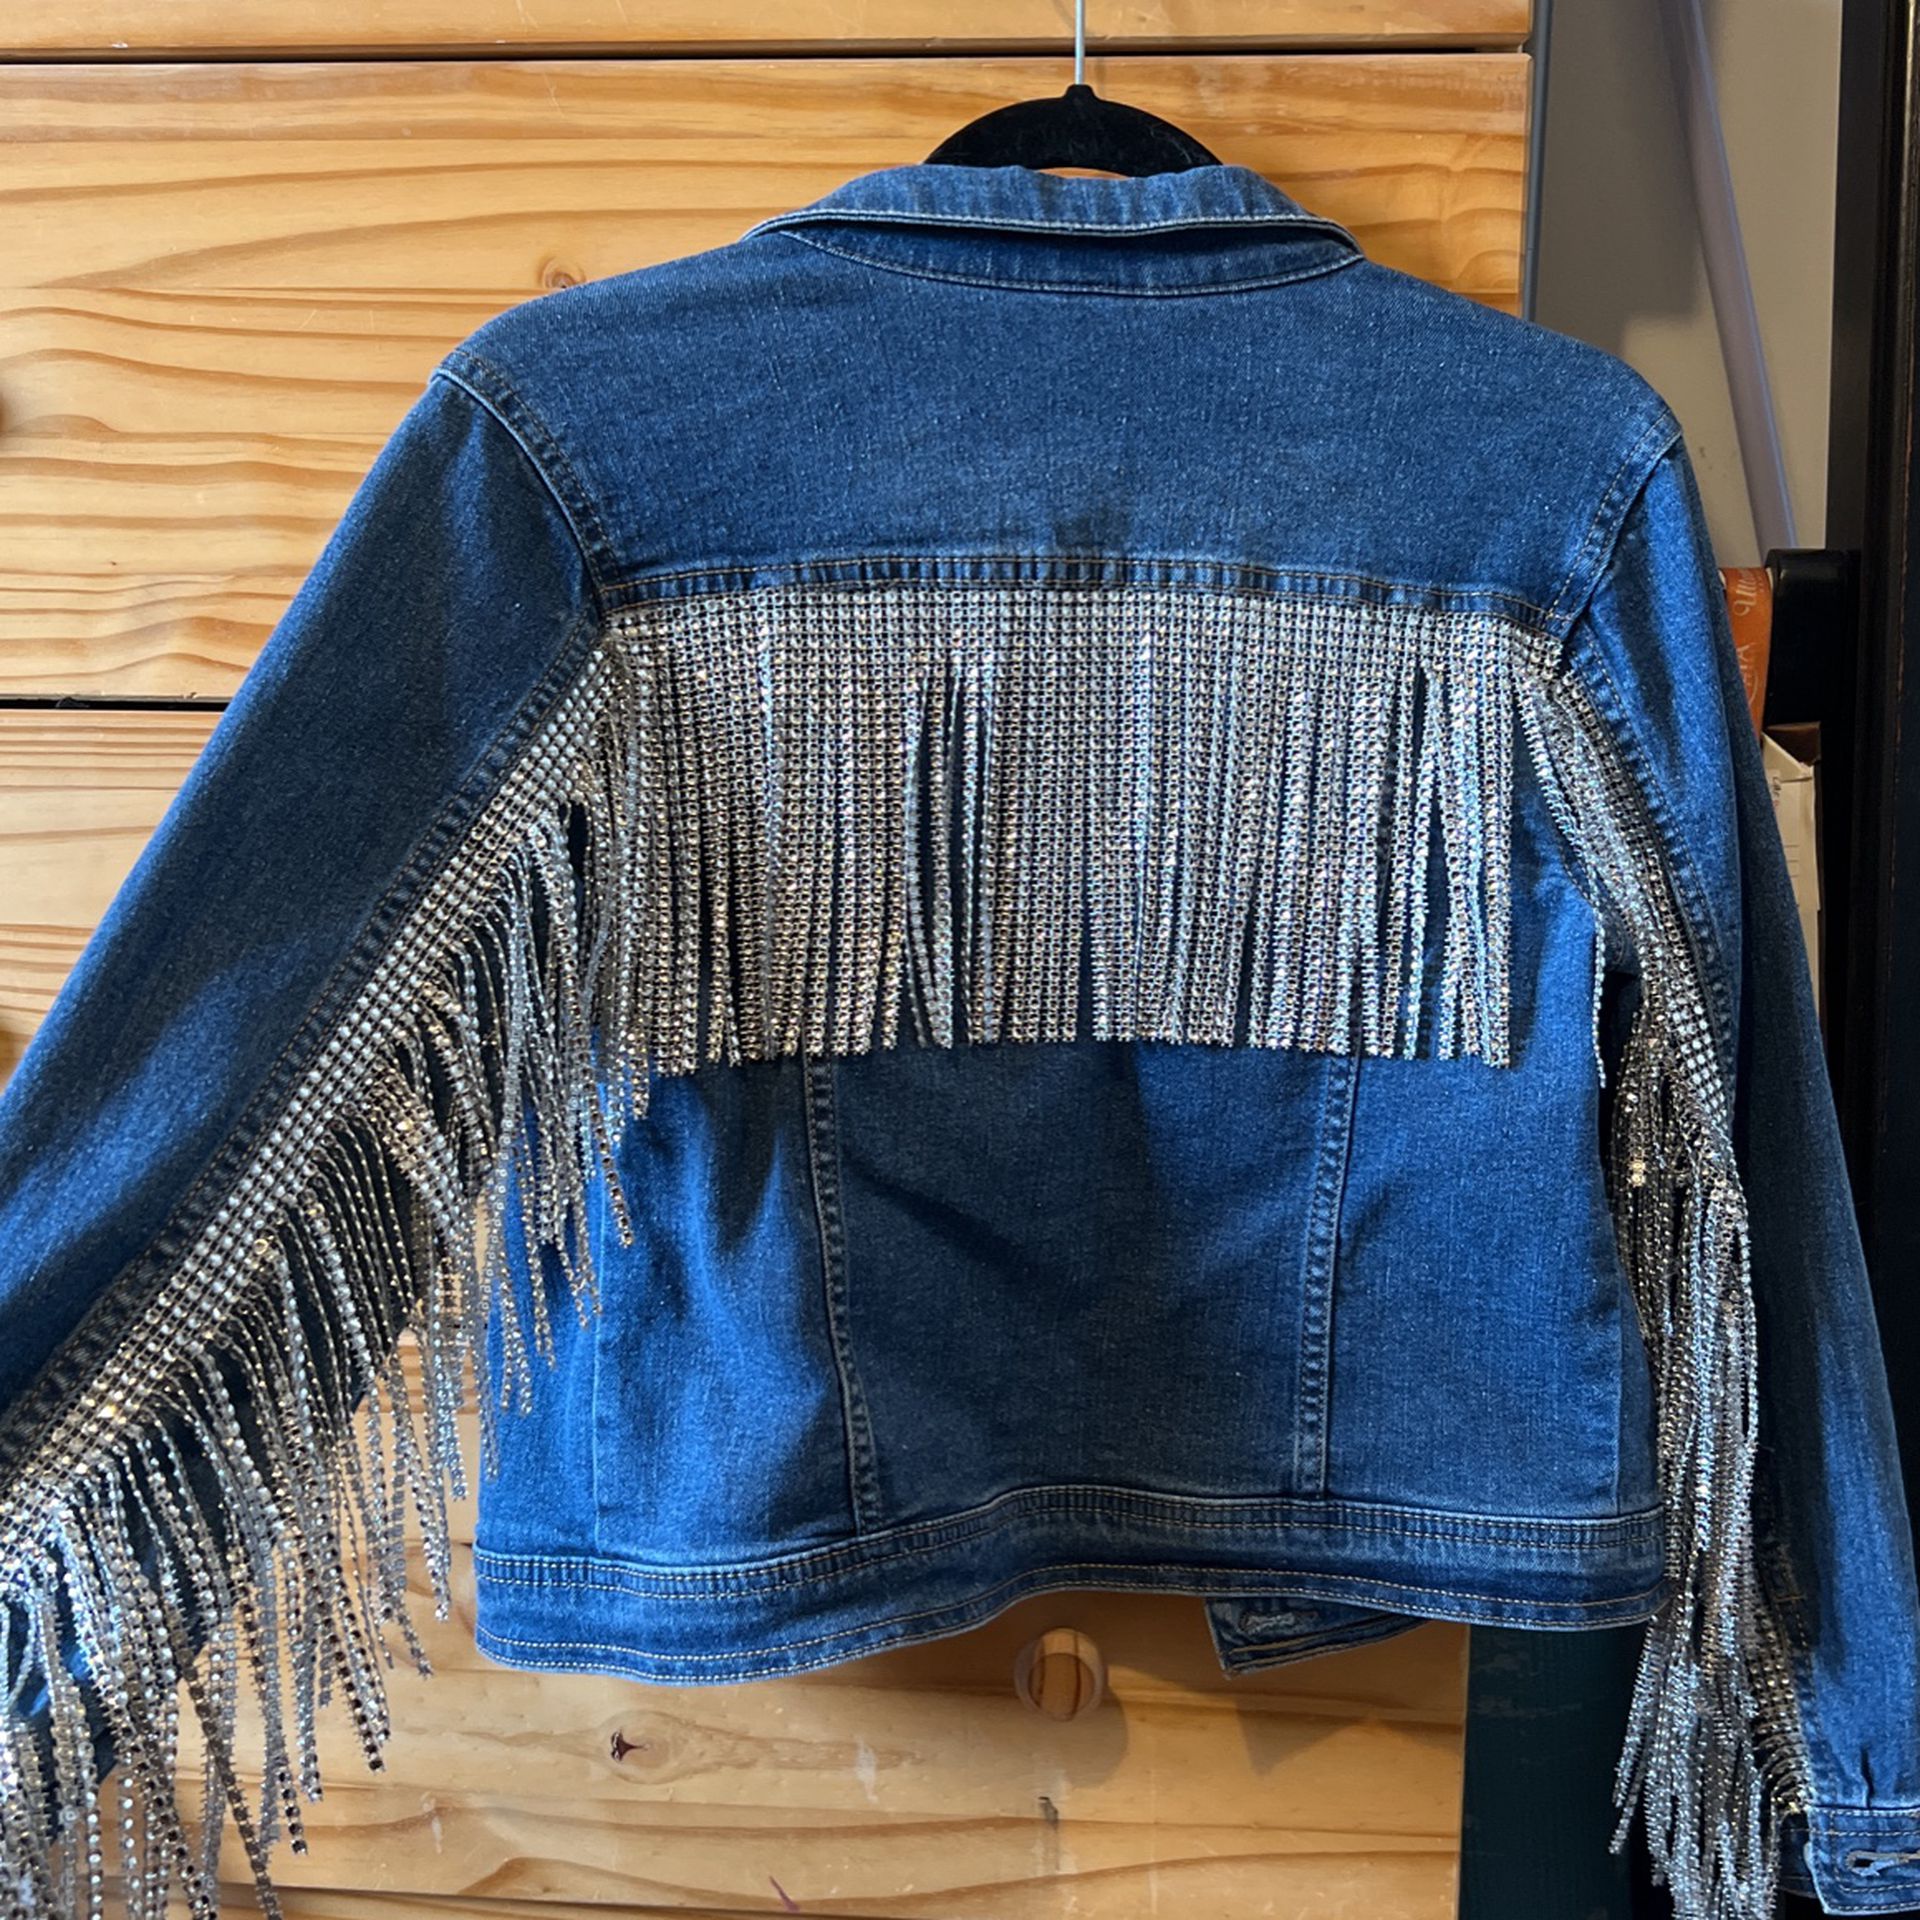 Rhinestone fringe denim jacket with silver details, perfect first stagecoach